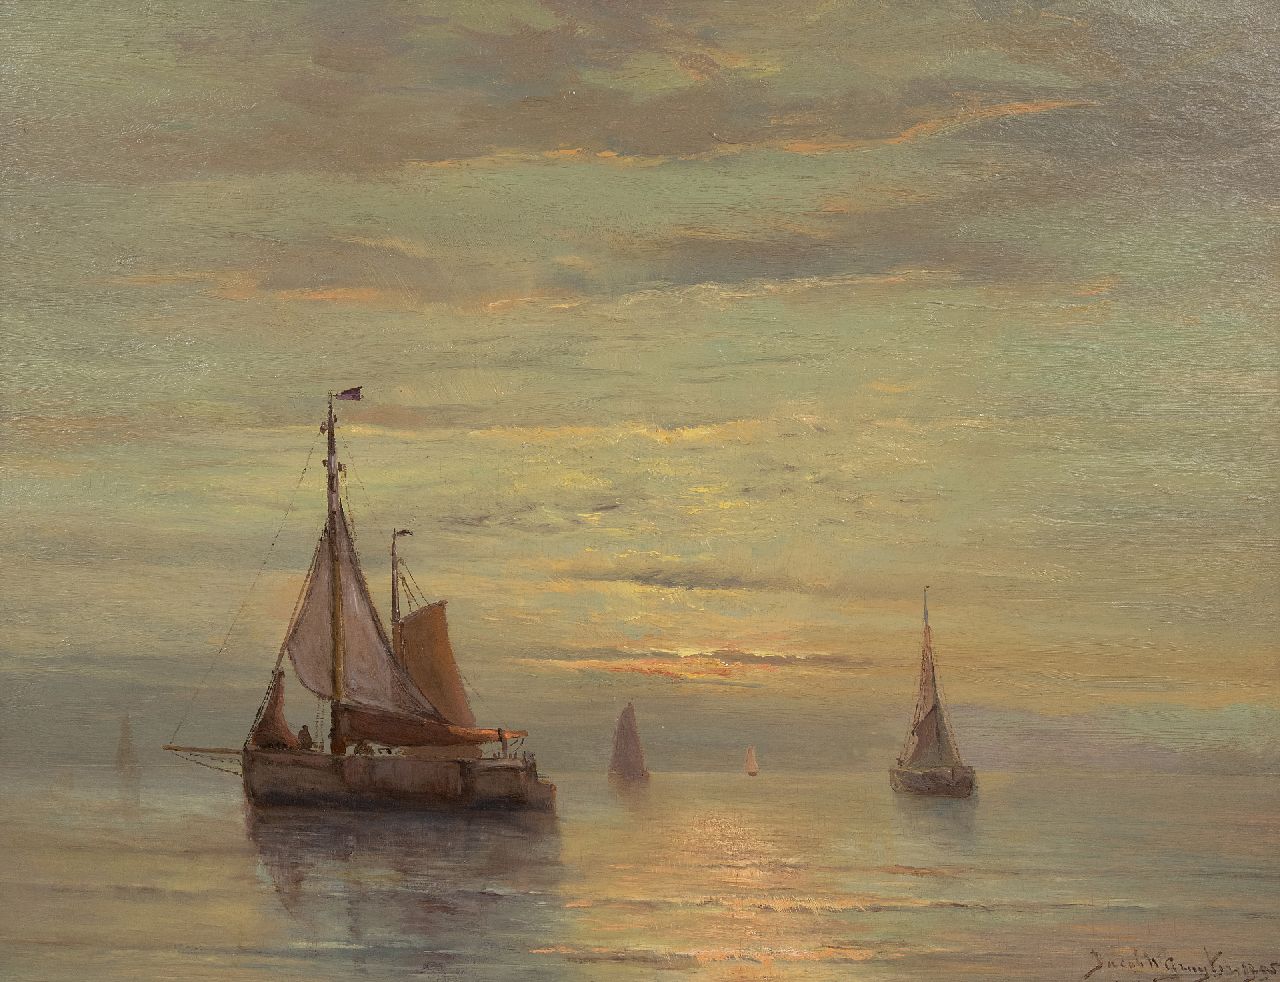 Gruijter J.W.  | Jacob Willem Gruijter | Paintings offered for sale | Ships in a calm at sunset, oil on panel 50.4 x 65.0 cm, signed l.r. and dated 1905, without frame